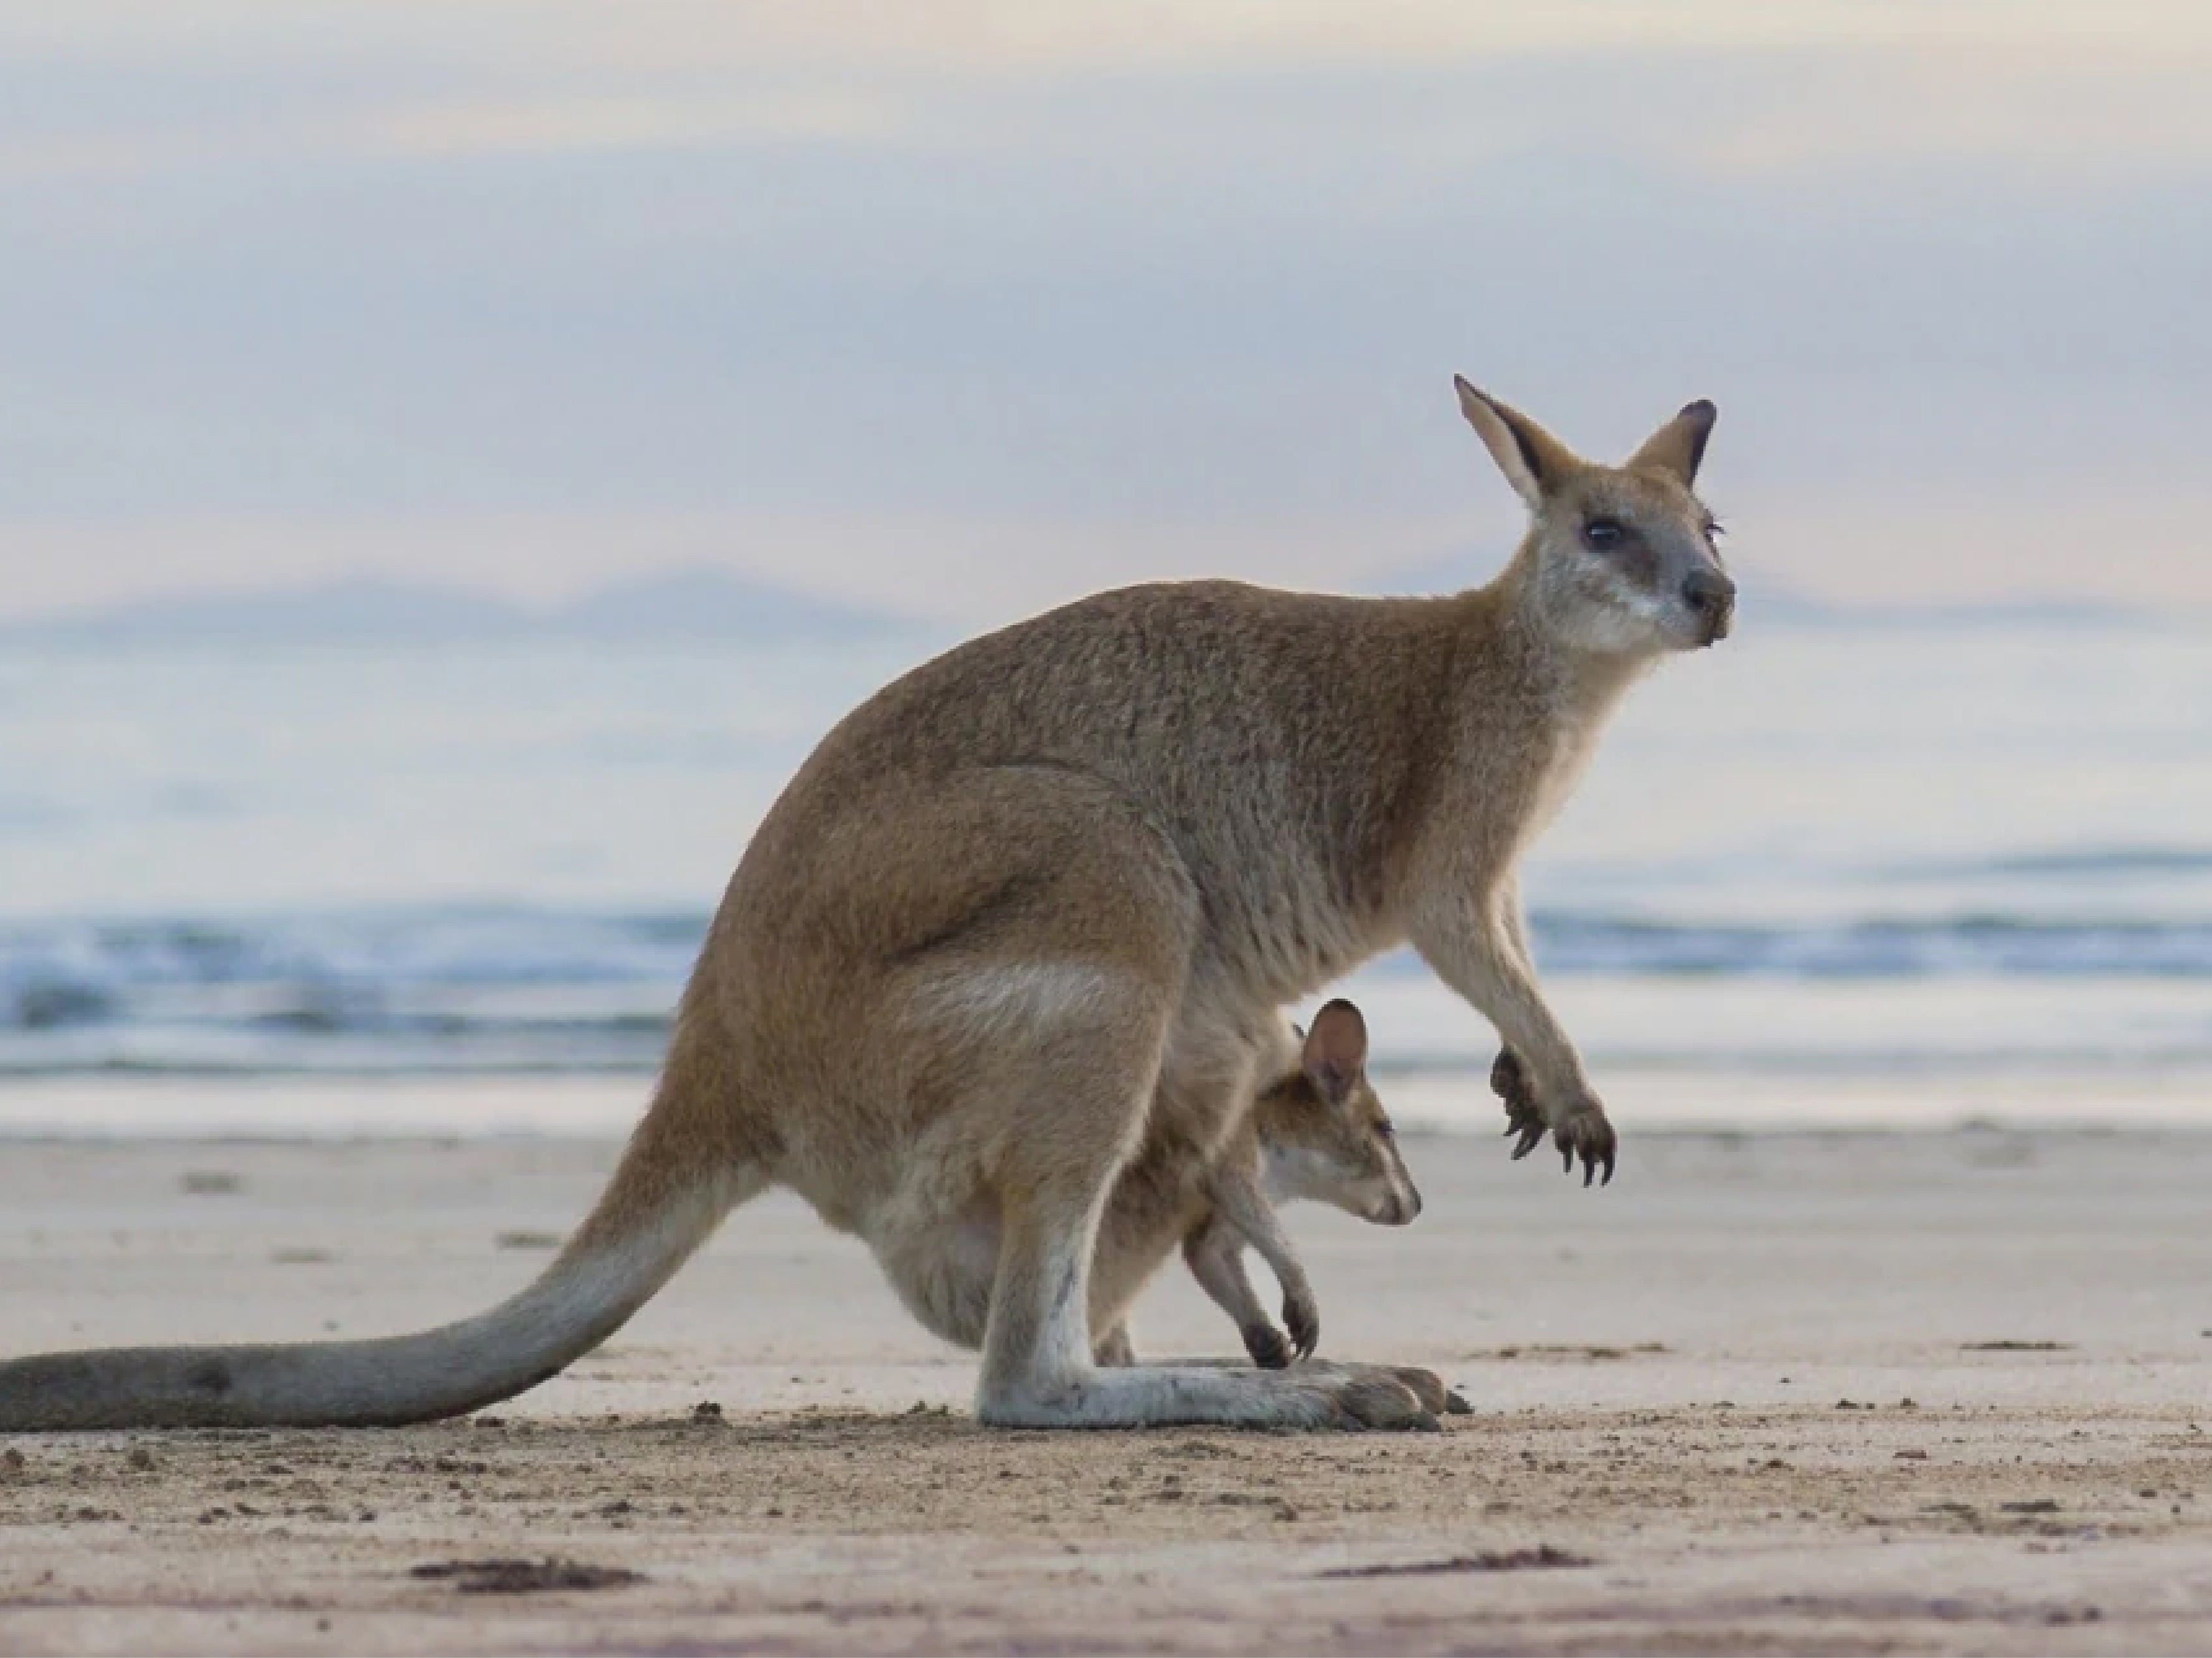 Victoria’s 100 reserves and parks, vast coastlines and rugged mountain ranges are home to some of Australia’s most iconic wildlife